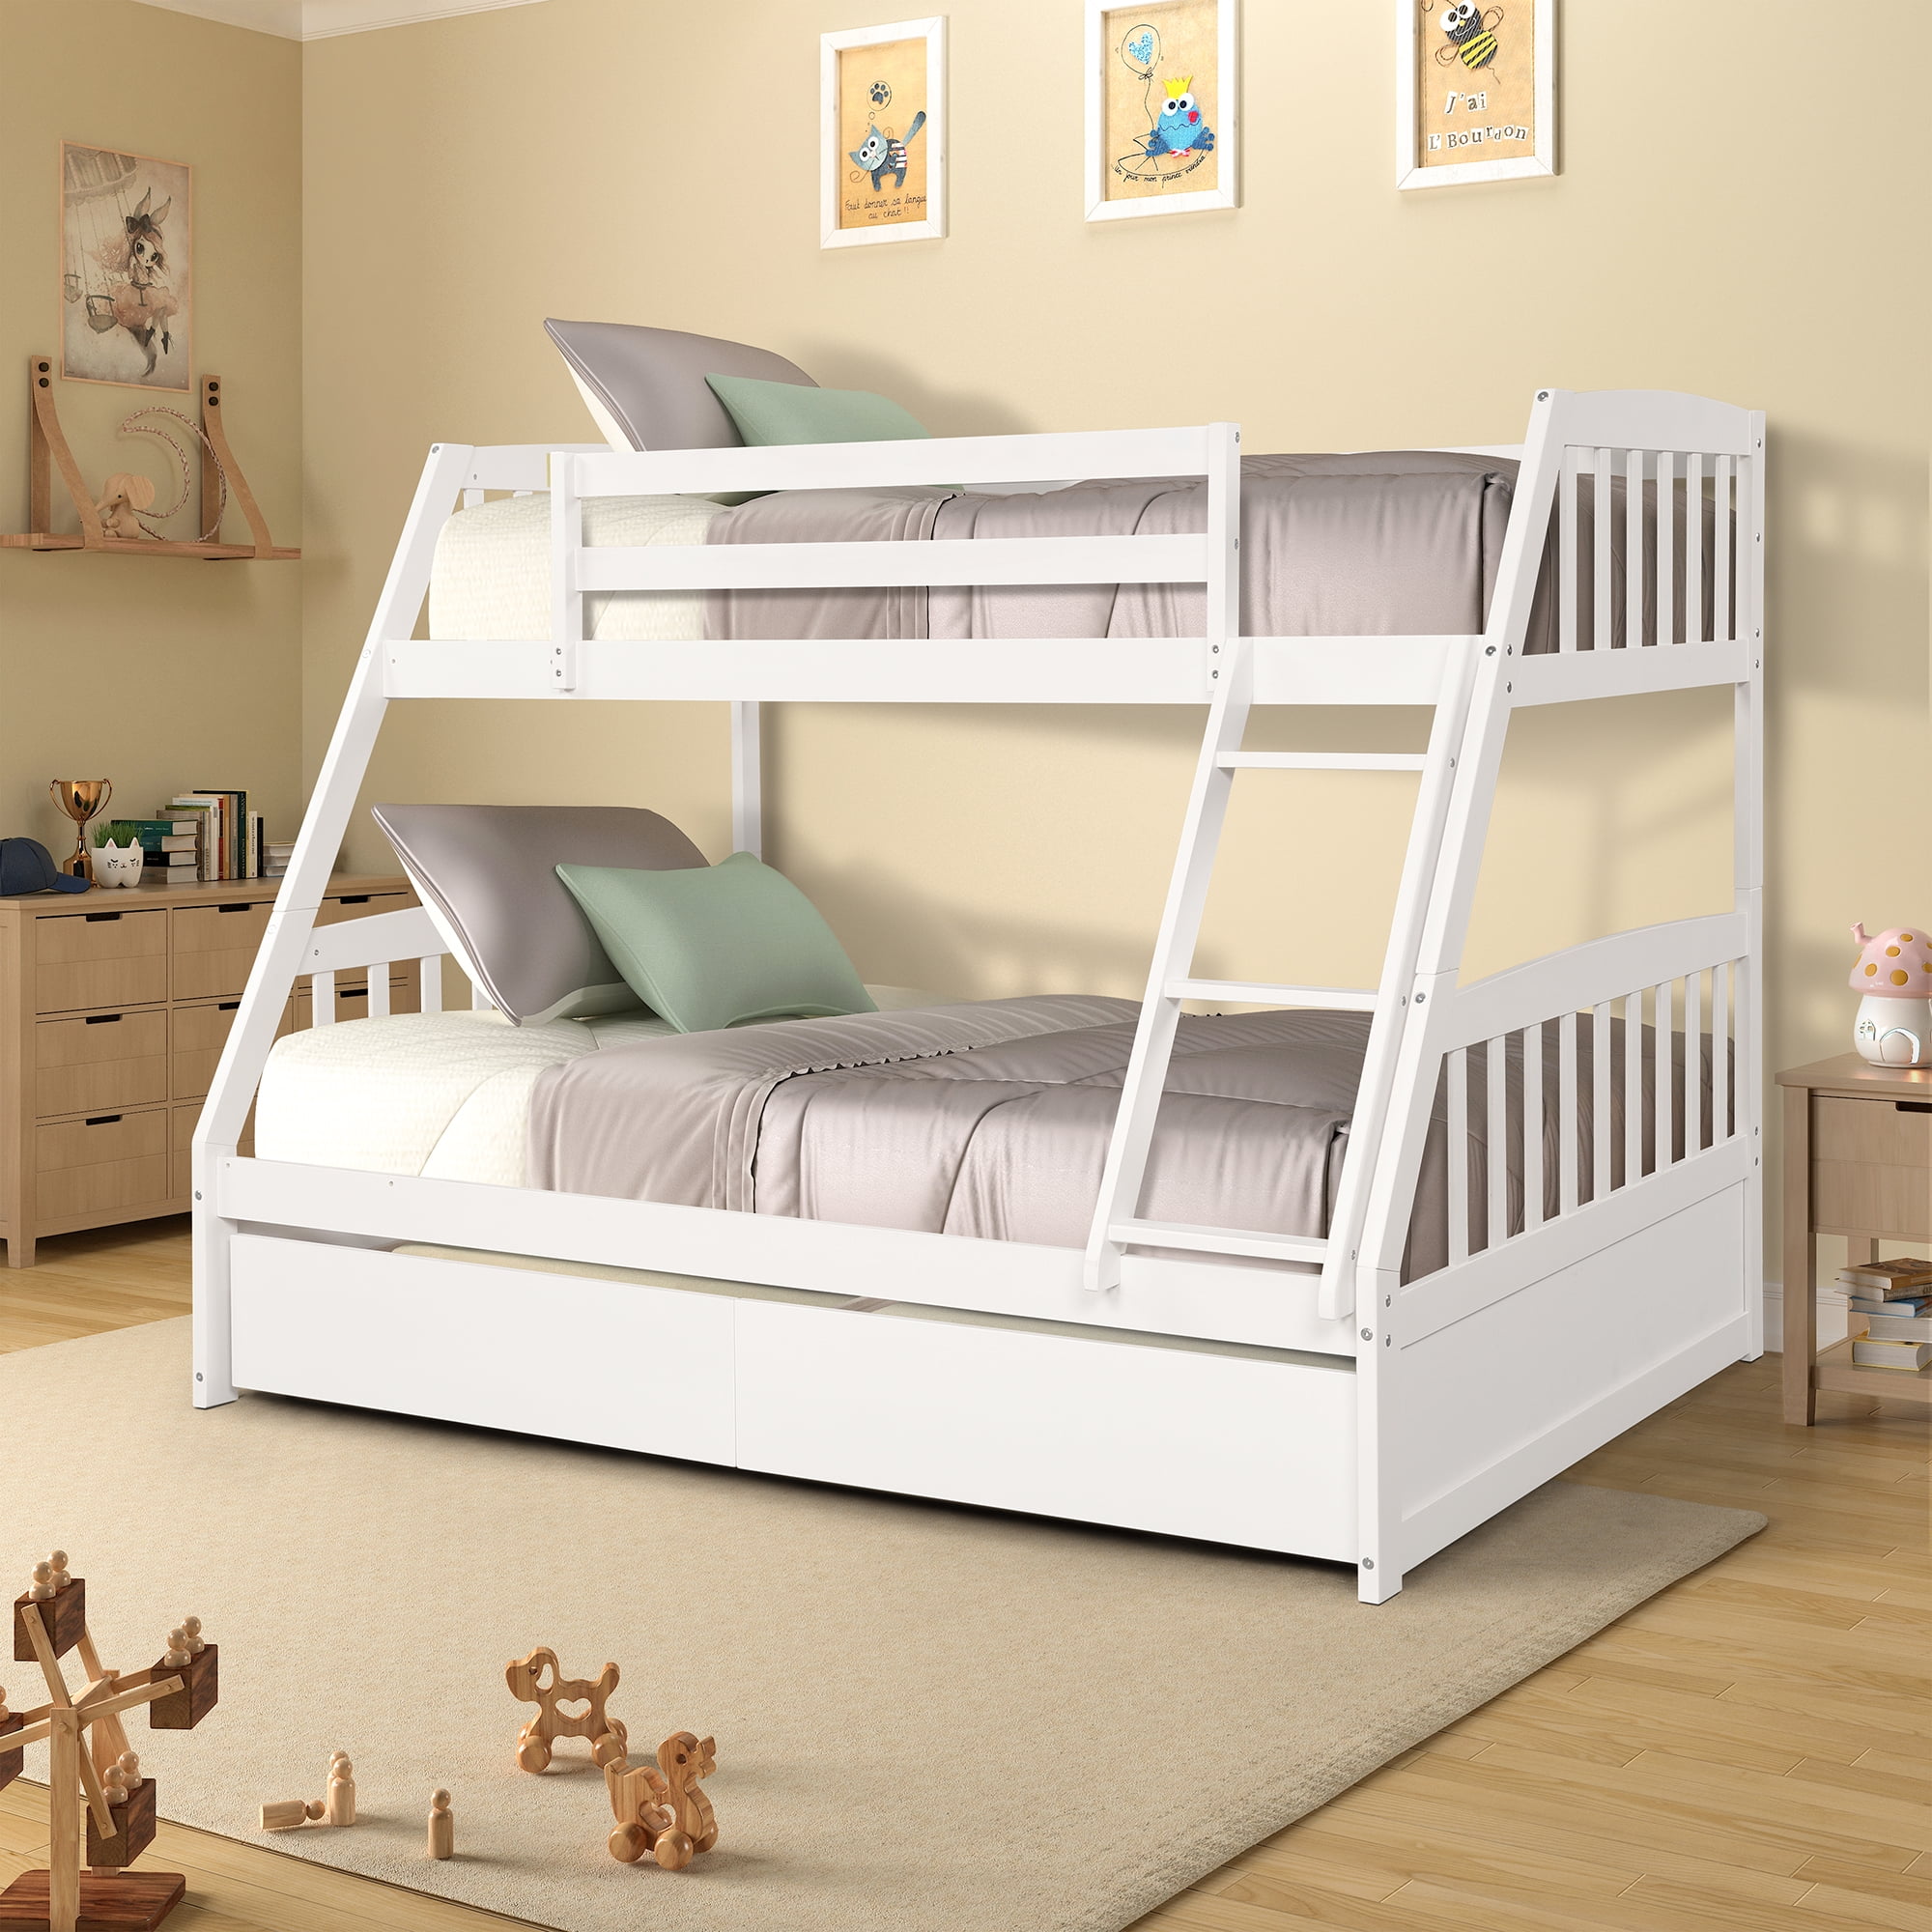 Kids Twin Over Full Bunk Beds, Solid Wood Bunk Beds With Ladder And Safety  Rail, Bunk Beds With Drawers, Bunk Beds For Boys Girls, Bunk Bed For Kids,  Guest Room, Bedroom, White,